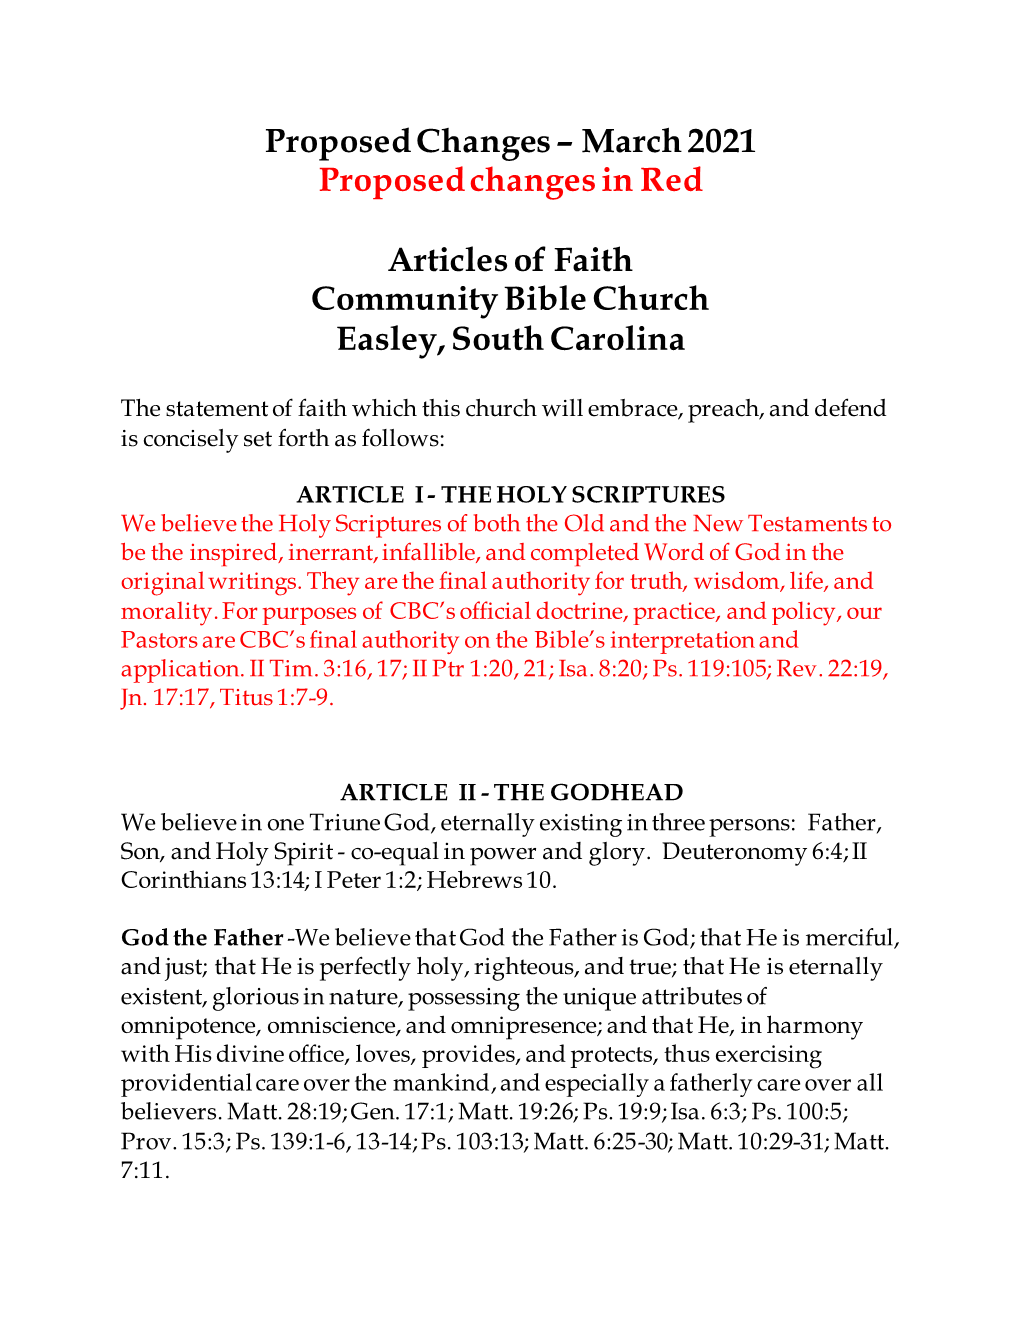 March 2021 Proposed Changes in Red Articles of Faith Community